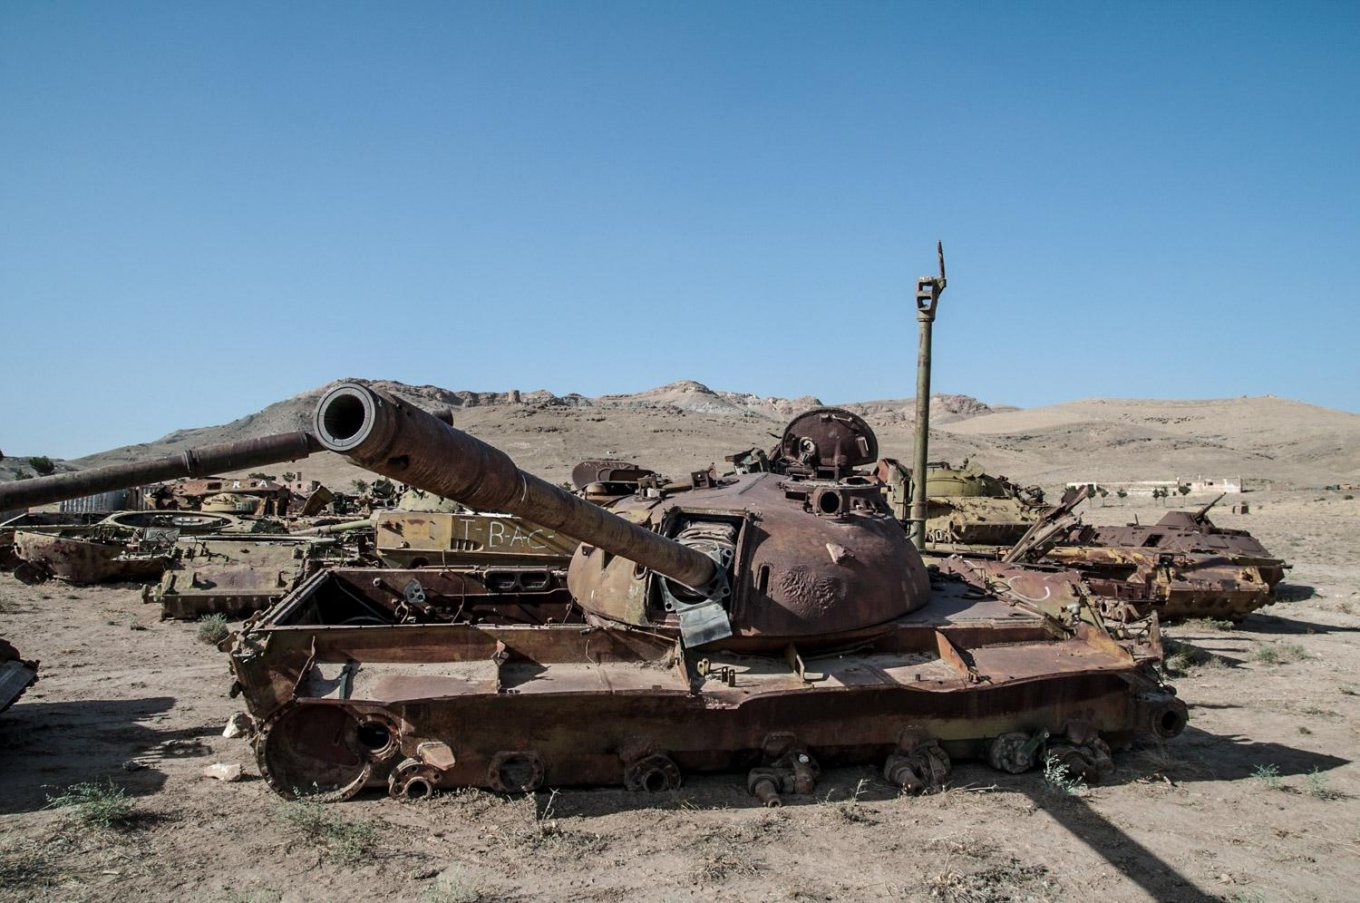 "Tank cemetery" in the outskirts of Kabul